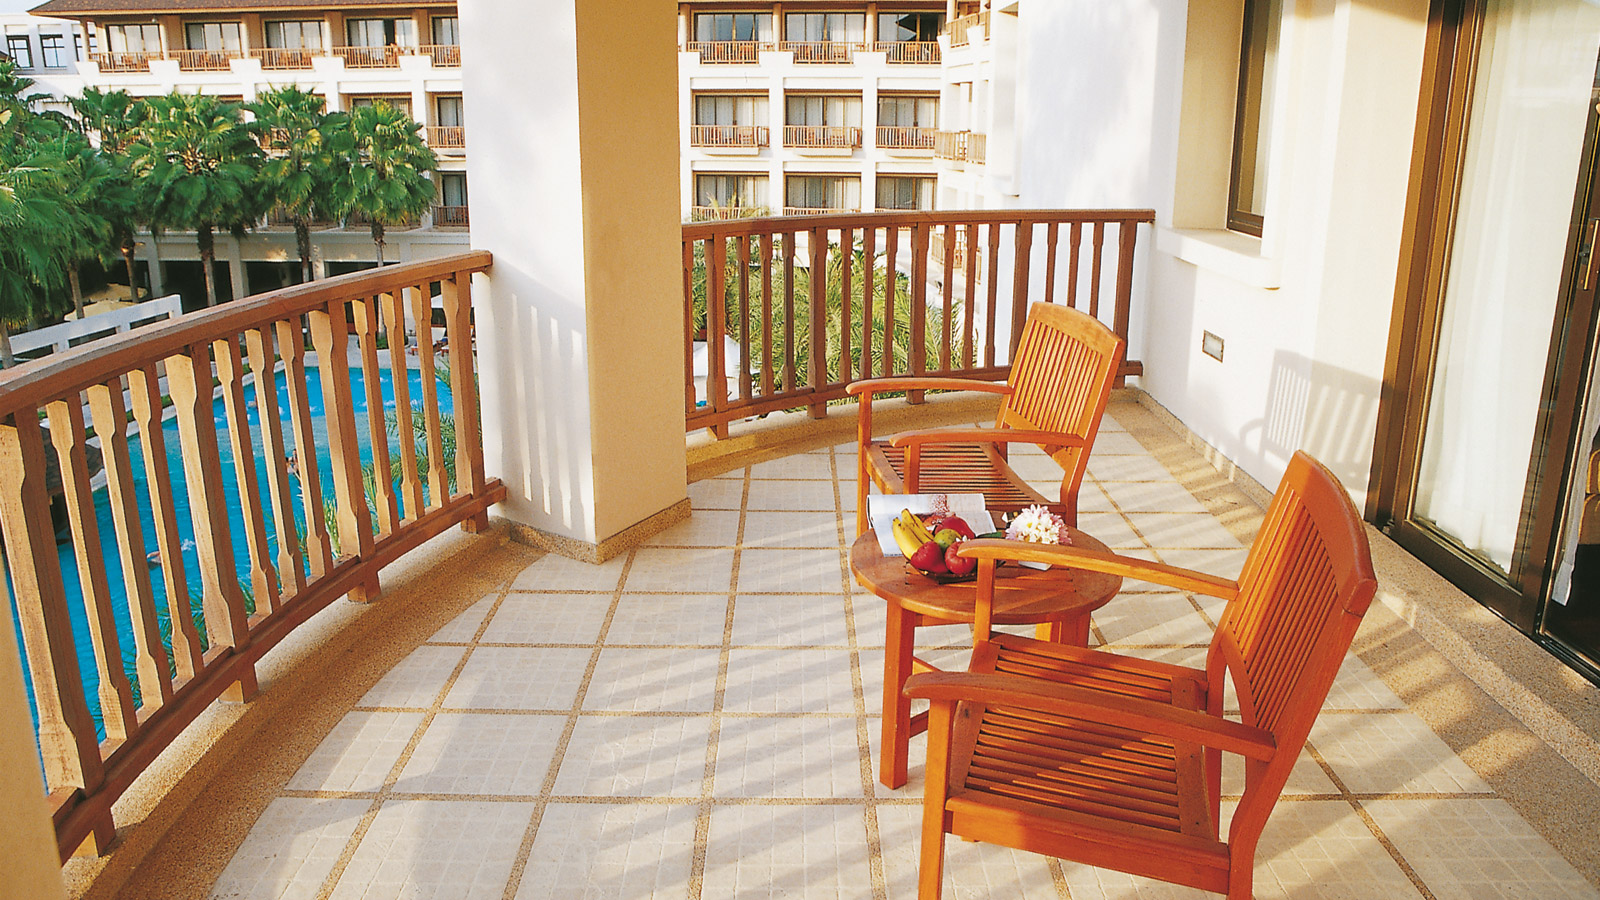 Private balcony details in The Tide Suite - The Tide Resort - เดอะ ไทด์ รีสอร์ท